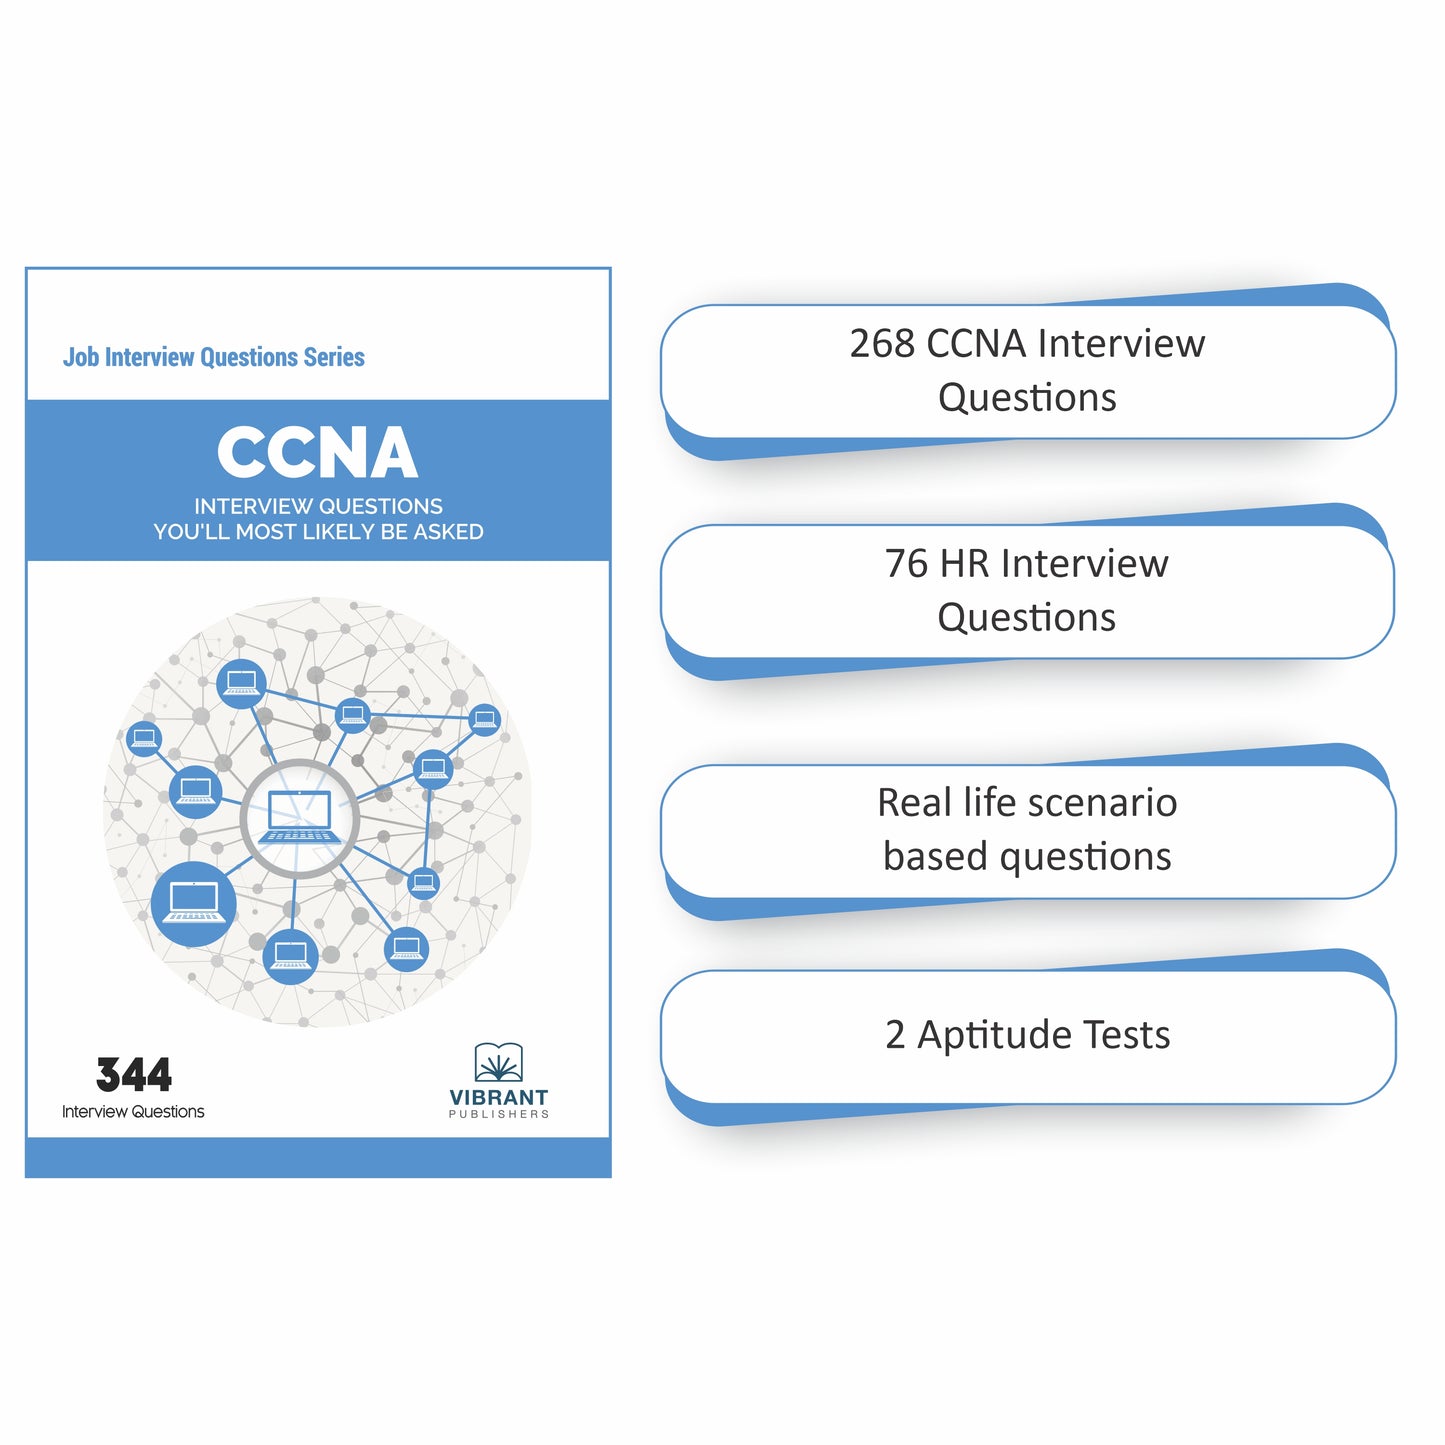 CCNA and HR Interview Questions - Your Complete Guide To All-Rounded CCNA Interview Prep